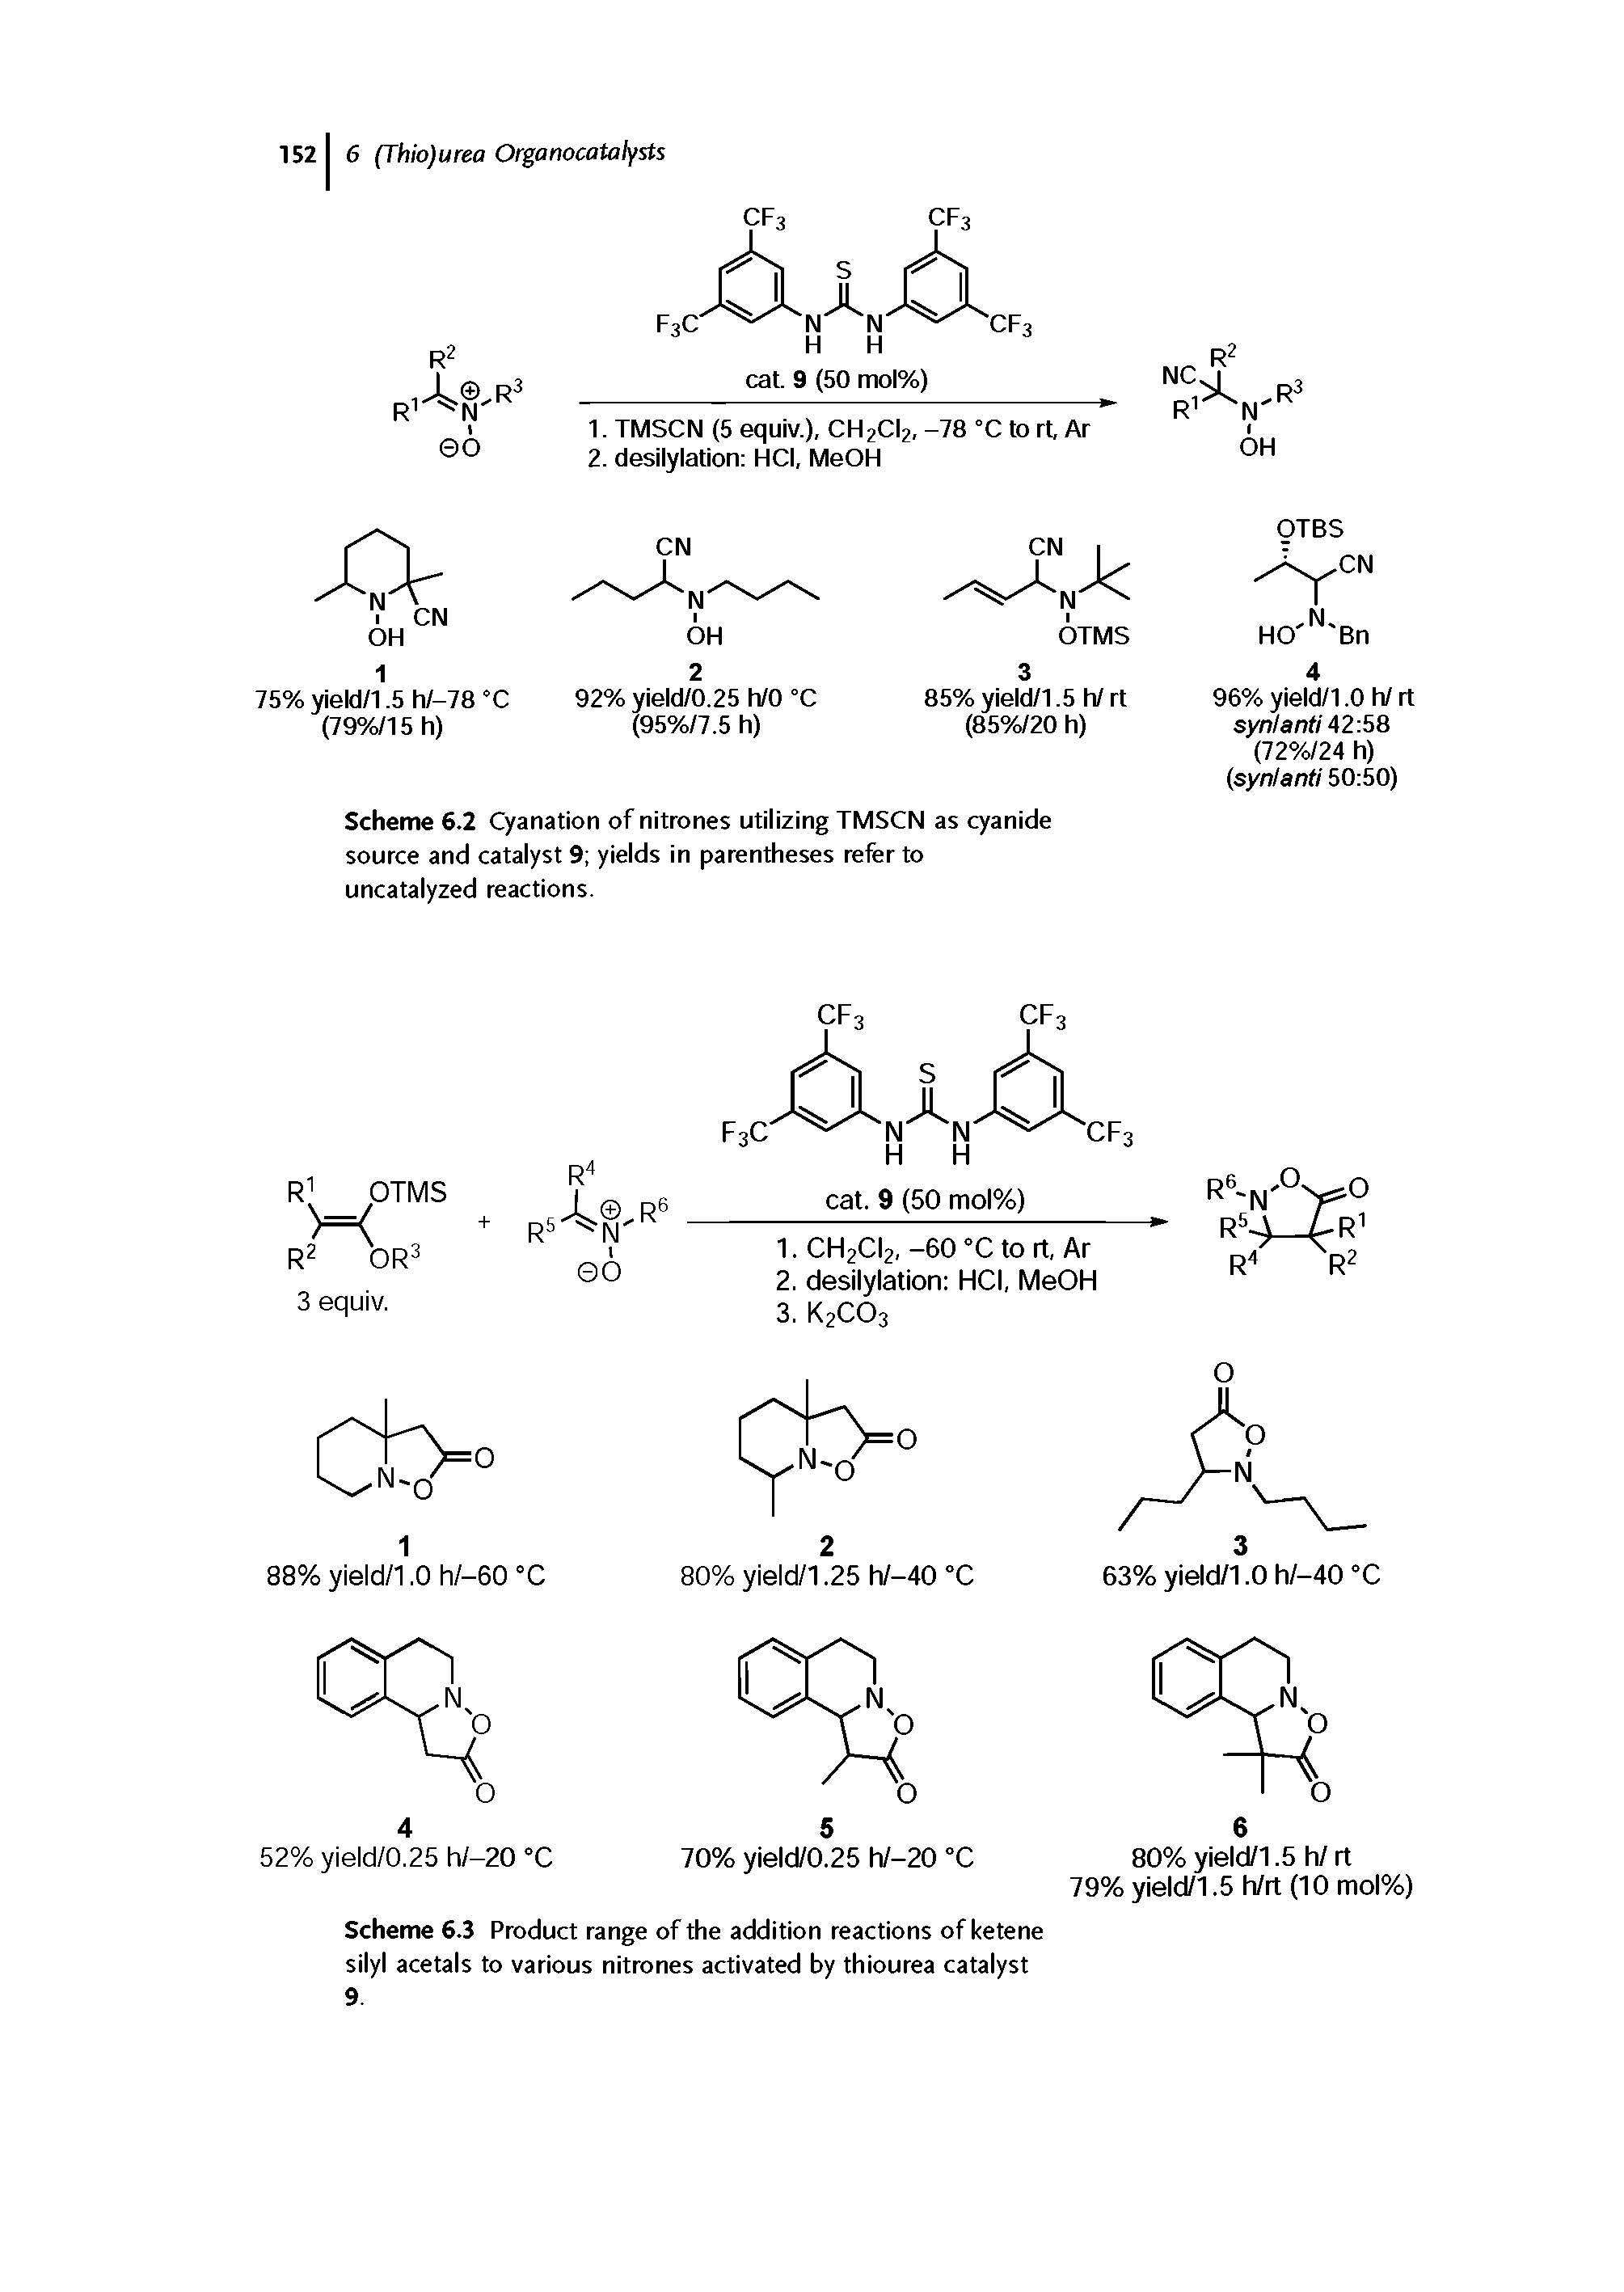 Scheme 6.2 Cyanation of nitrones utilizing TMSCN as cyanide source and catalyst 9 yields in parentheses refer to uncatalyzed reactions.